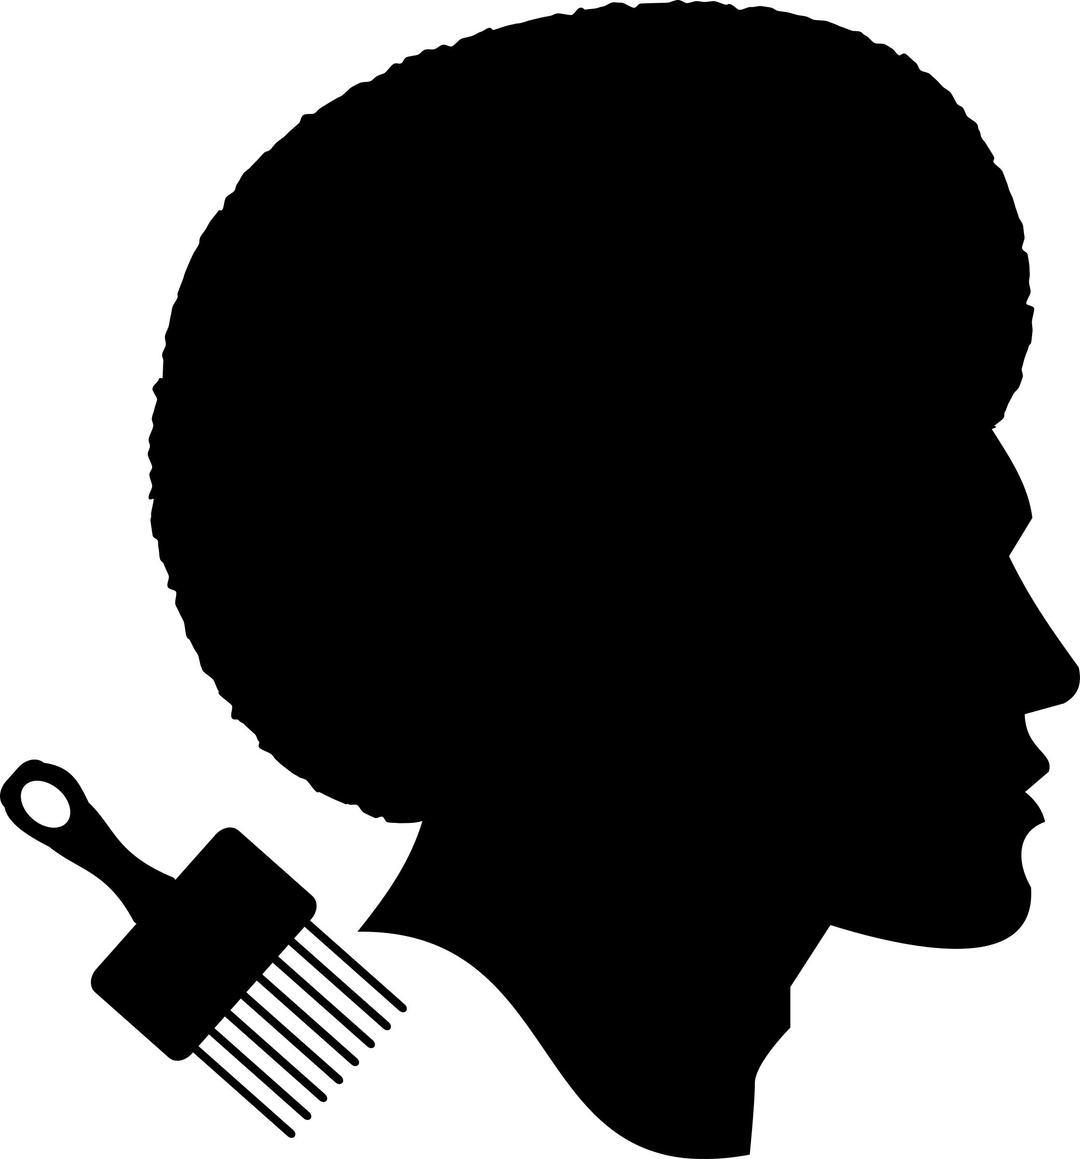 African American Male Silhouette png transparent